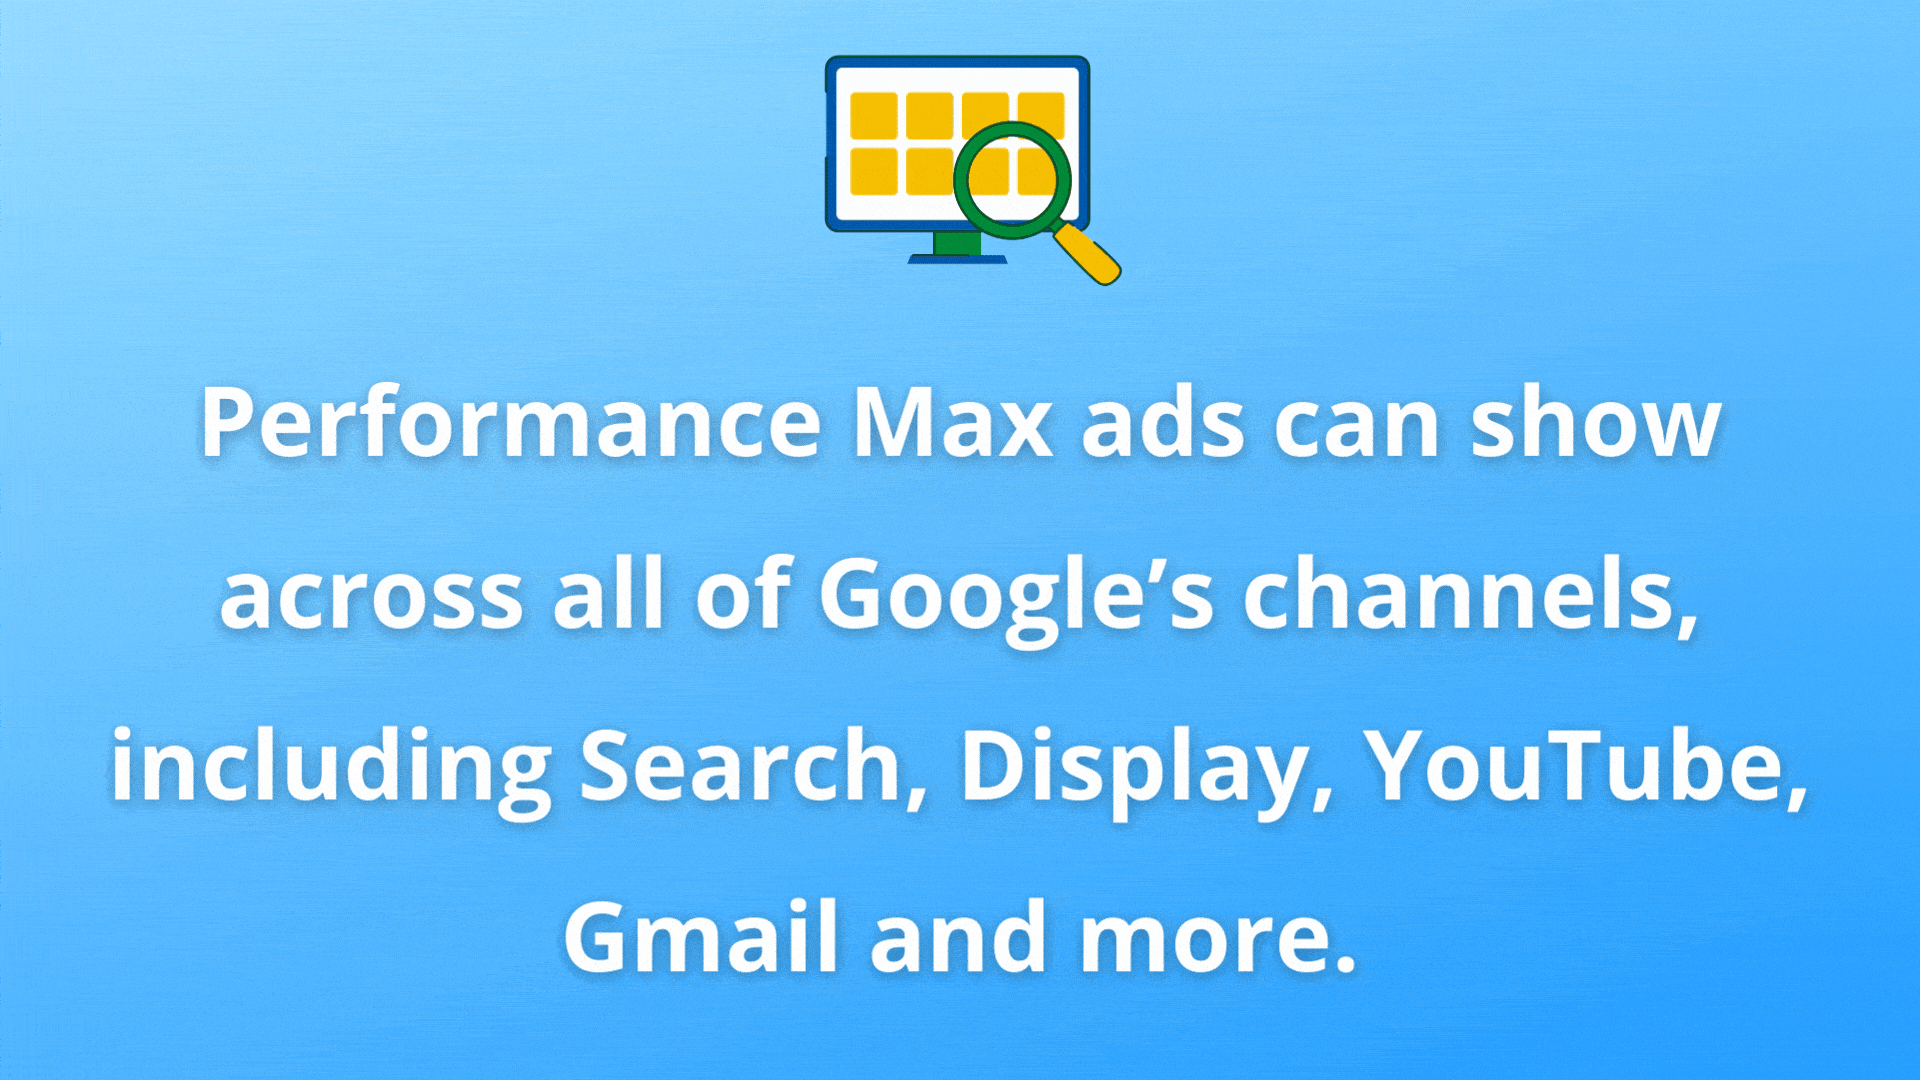 Performance Max ads show across all Google channels